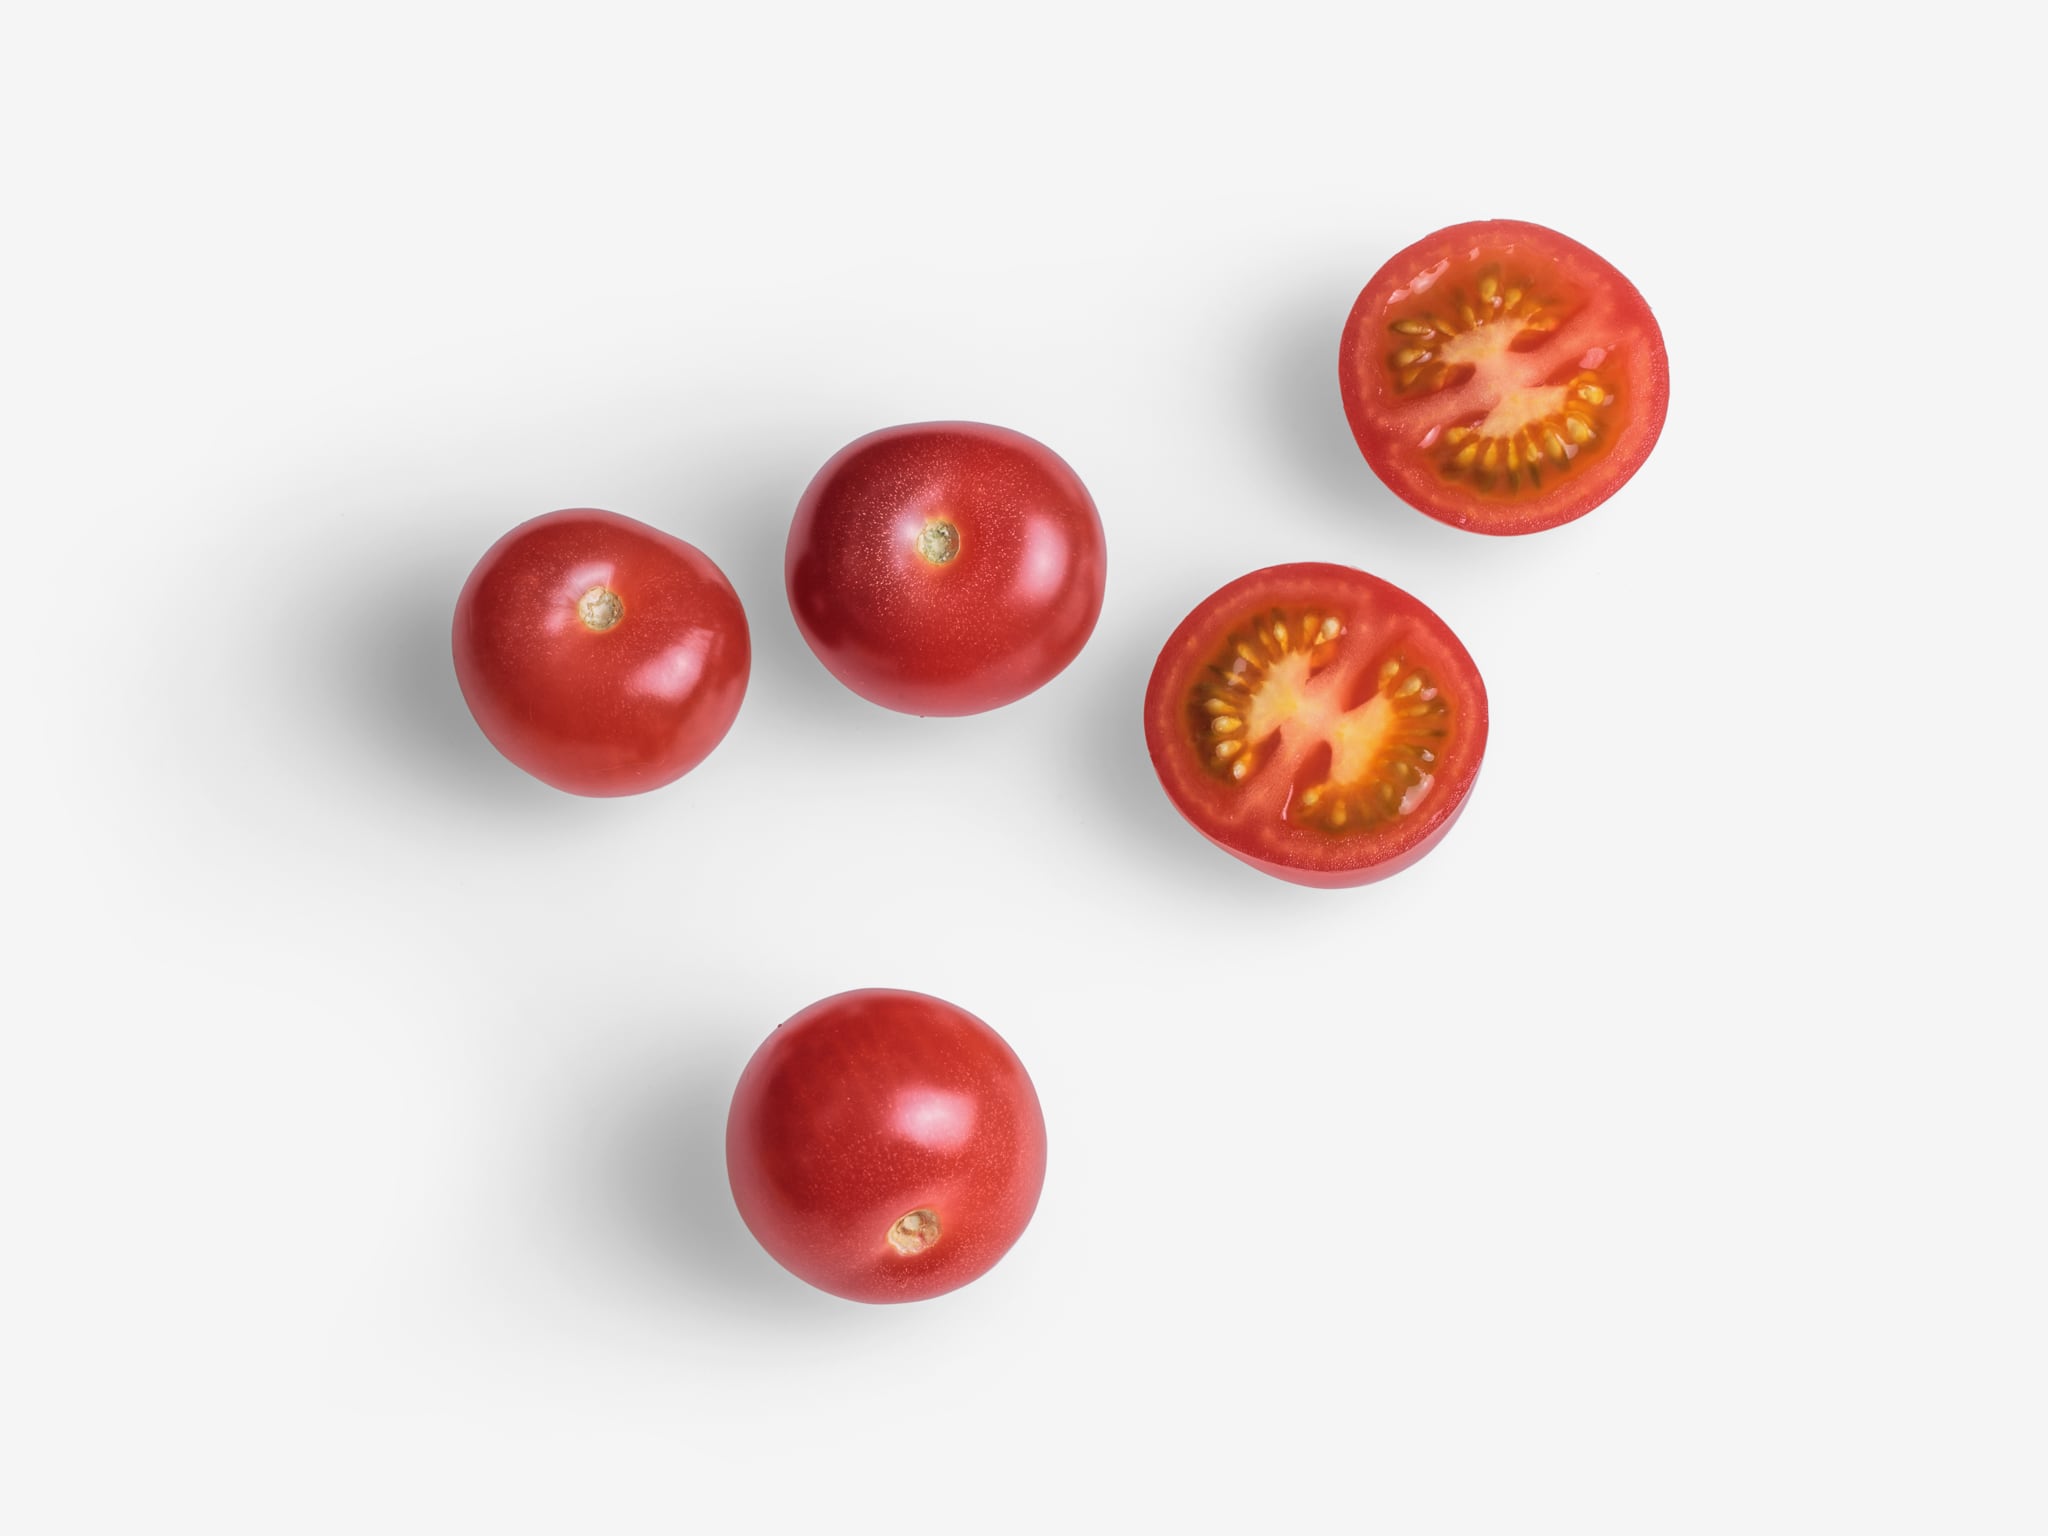 Tomato image with transparent background